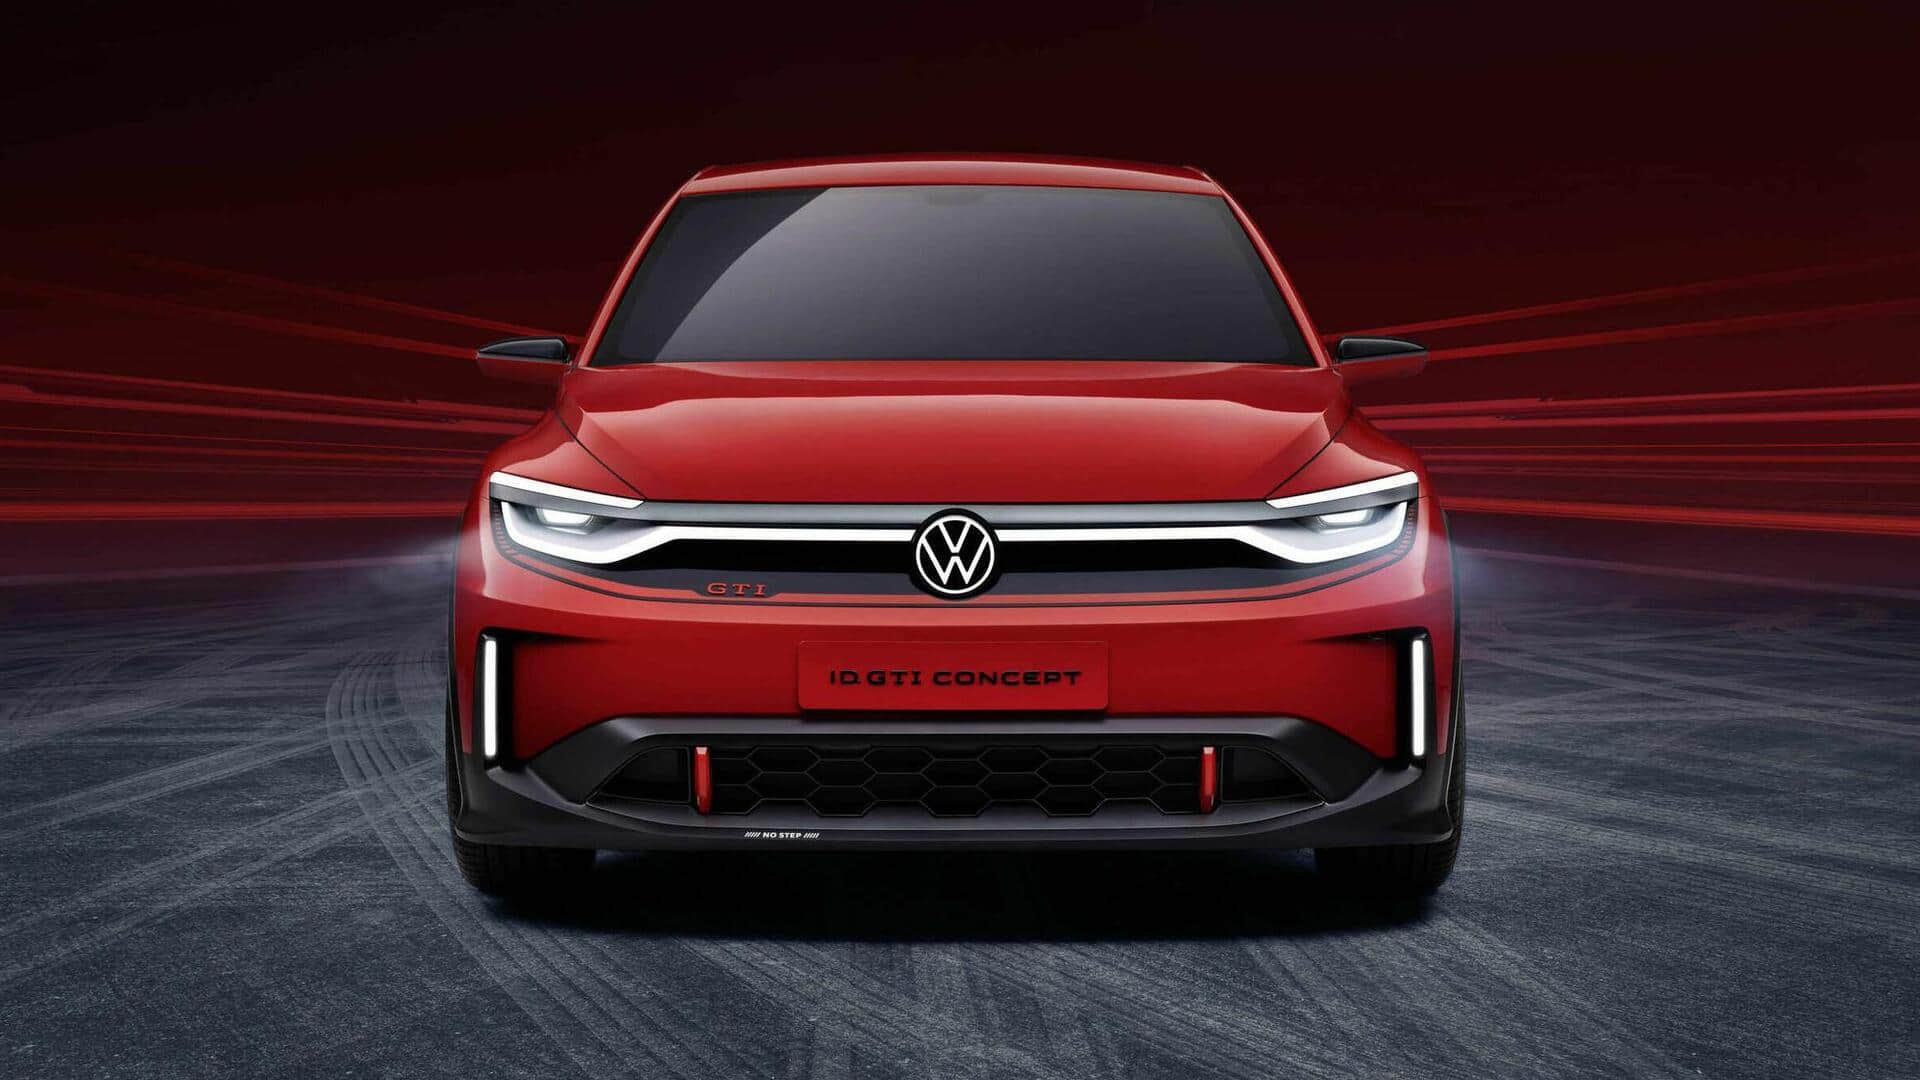 ID. GTI Concept previews Volkswagen's upcoming electric hatchback